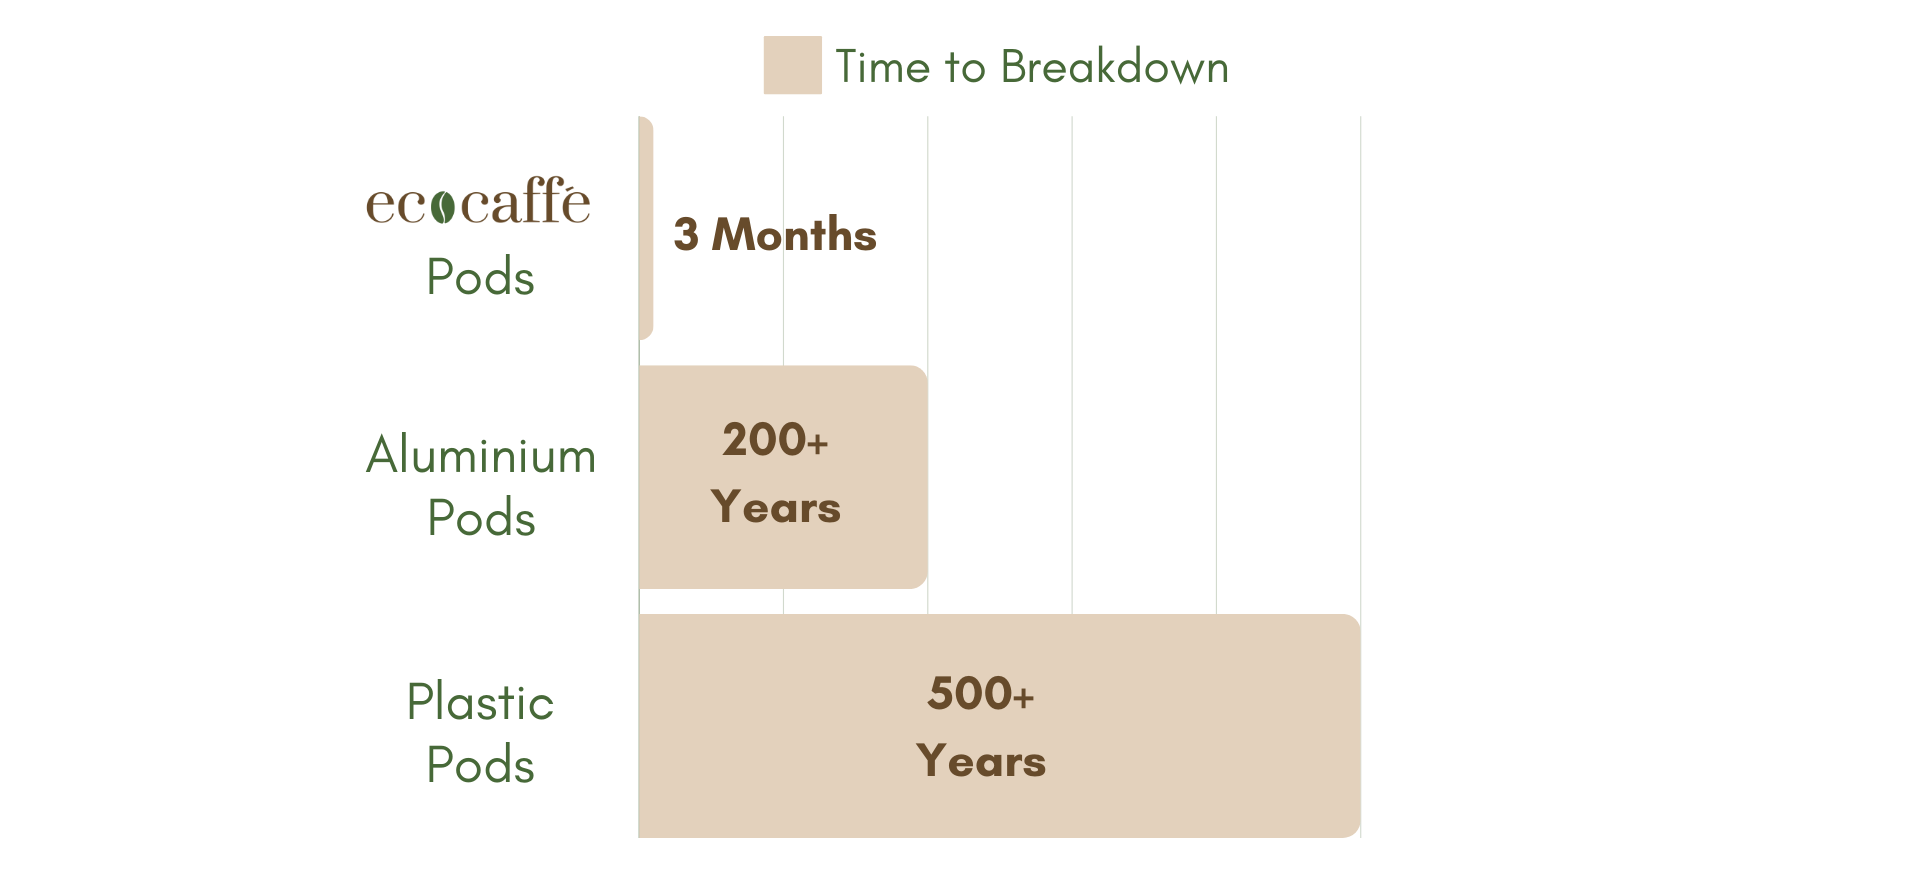 Time_for_compostable_coffee_pods_to_breakdown